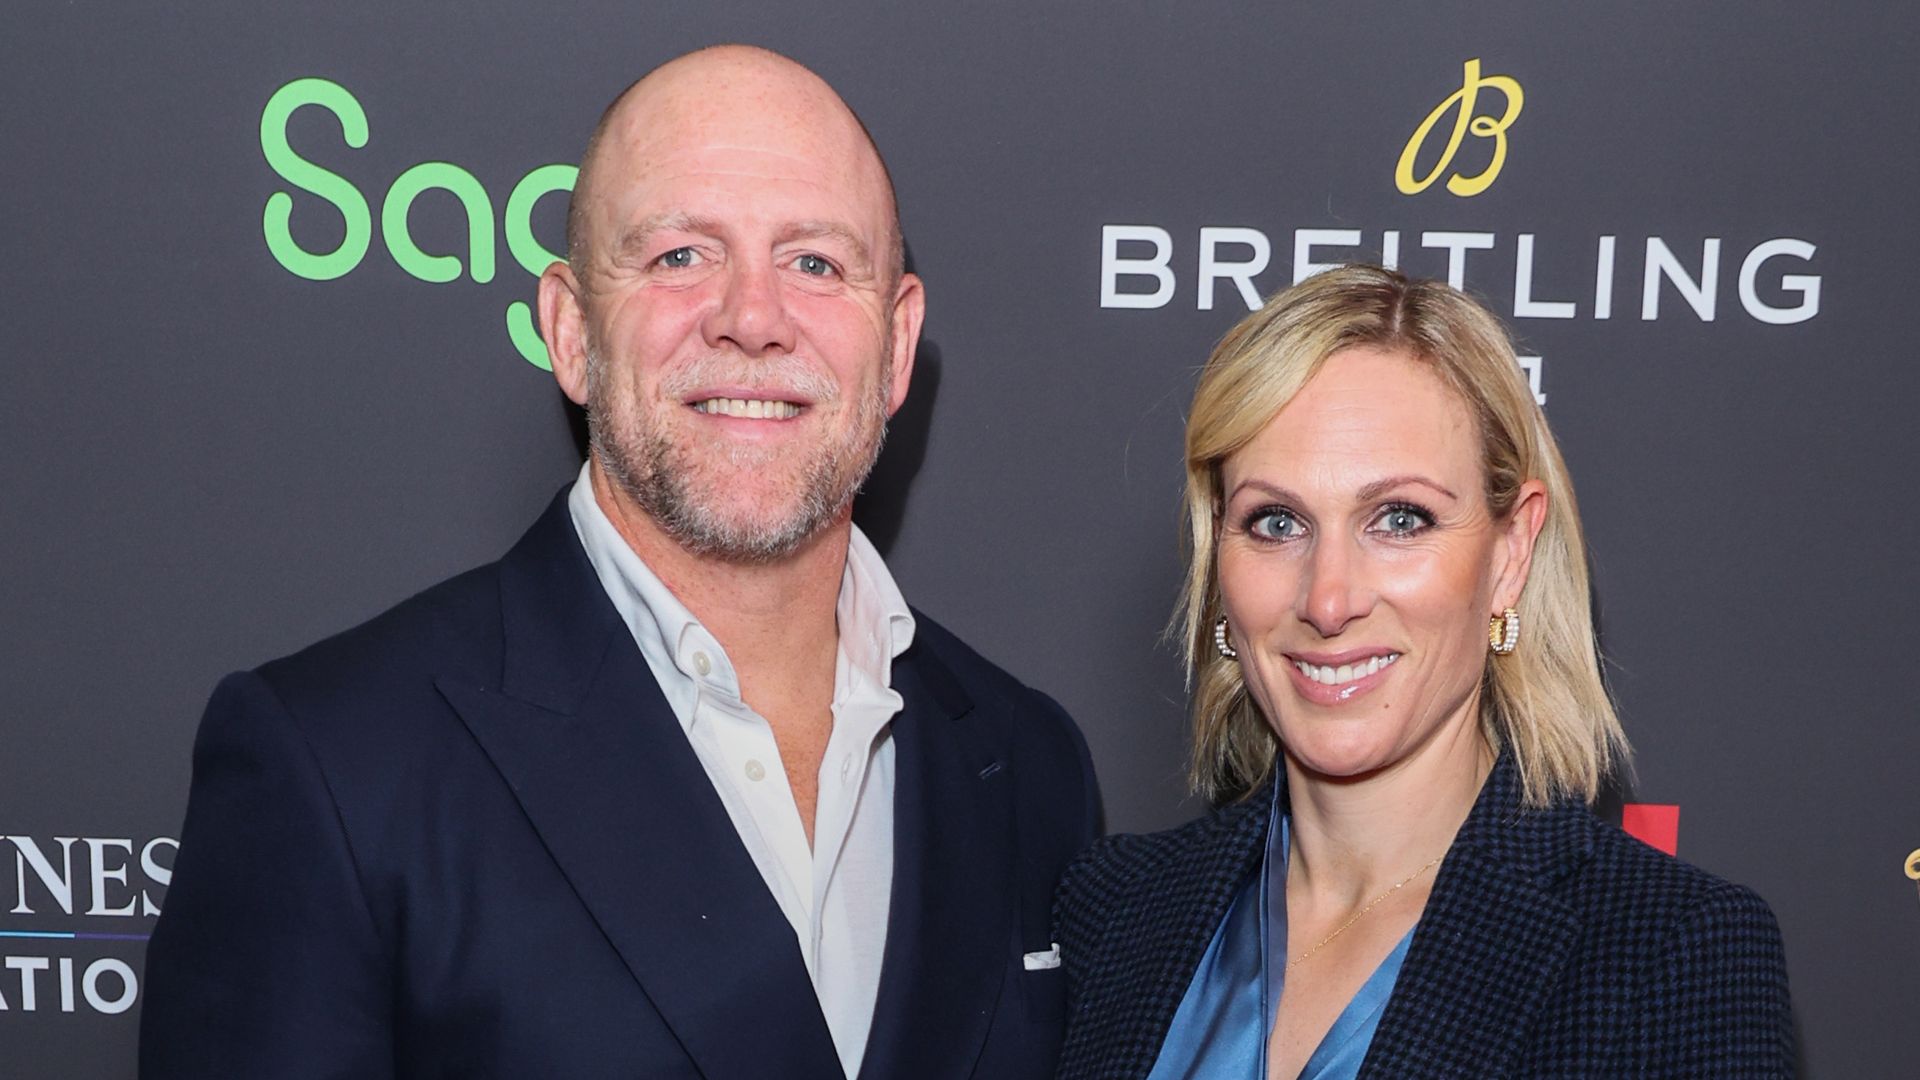 Mike Tindall and Zara Tindall in formal wear